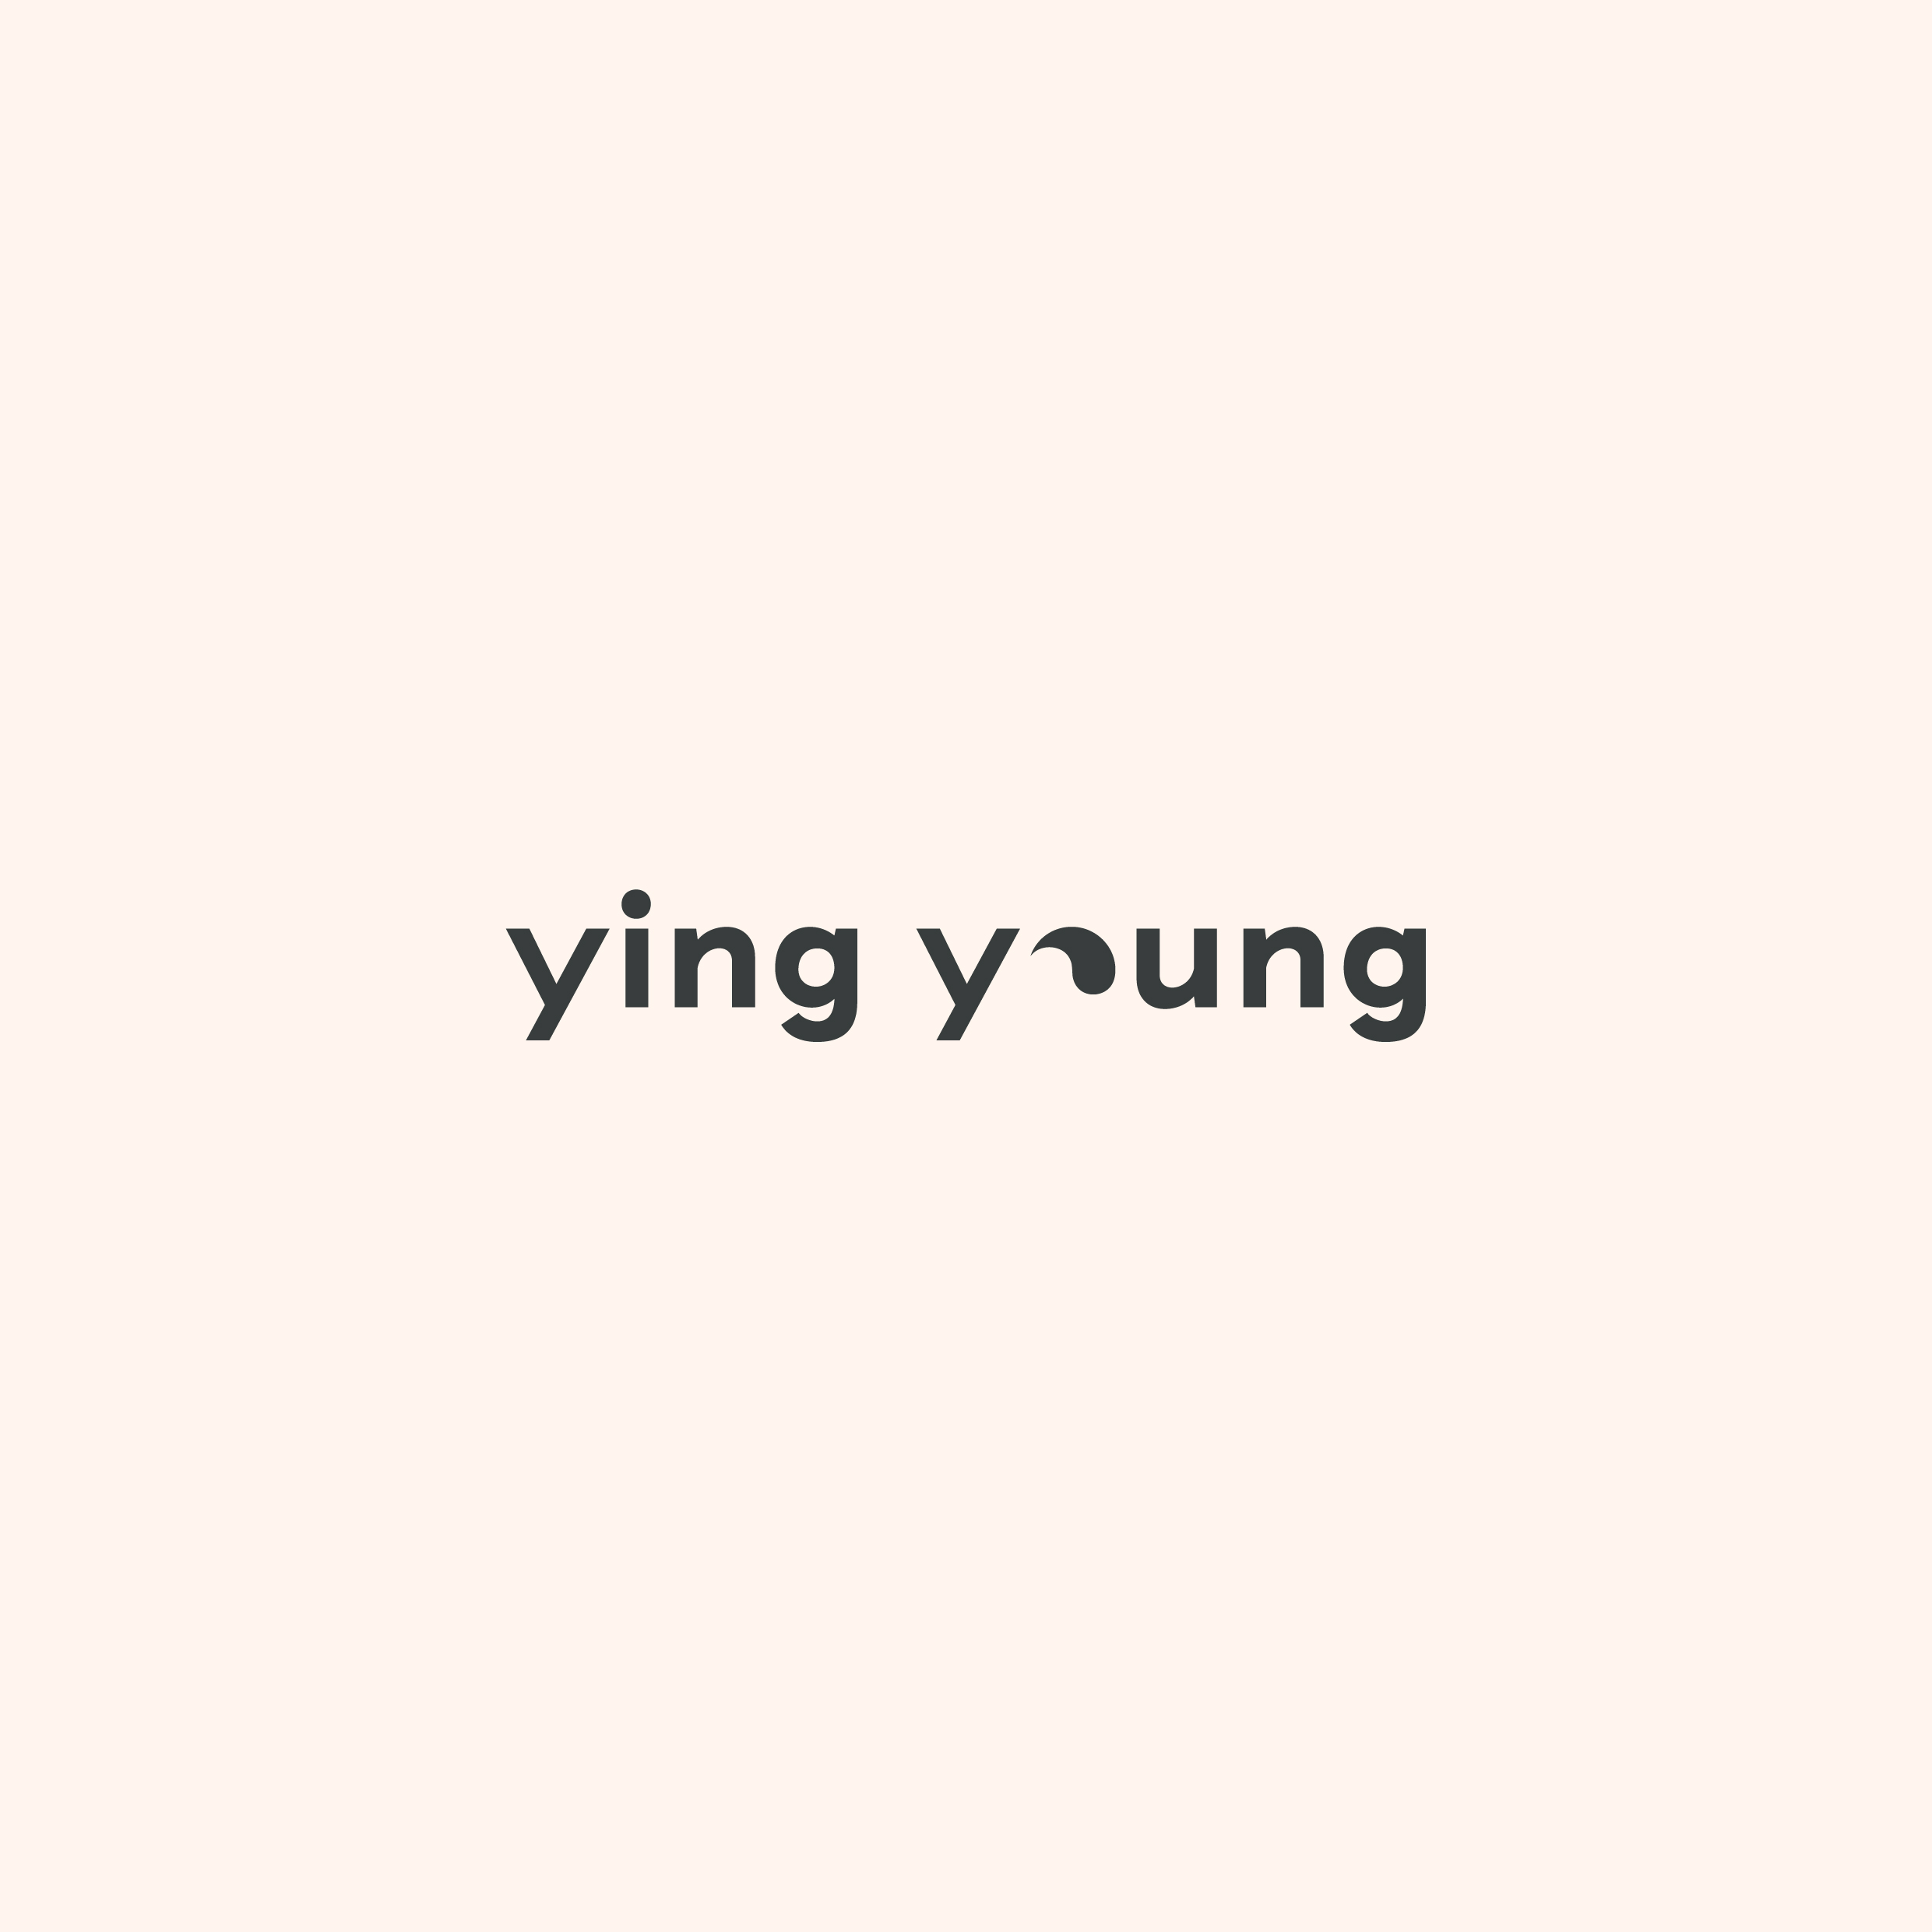 Ying_young-02